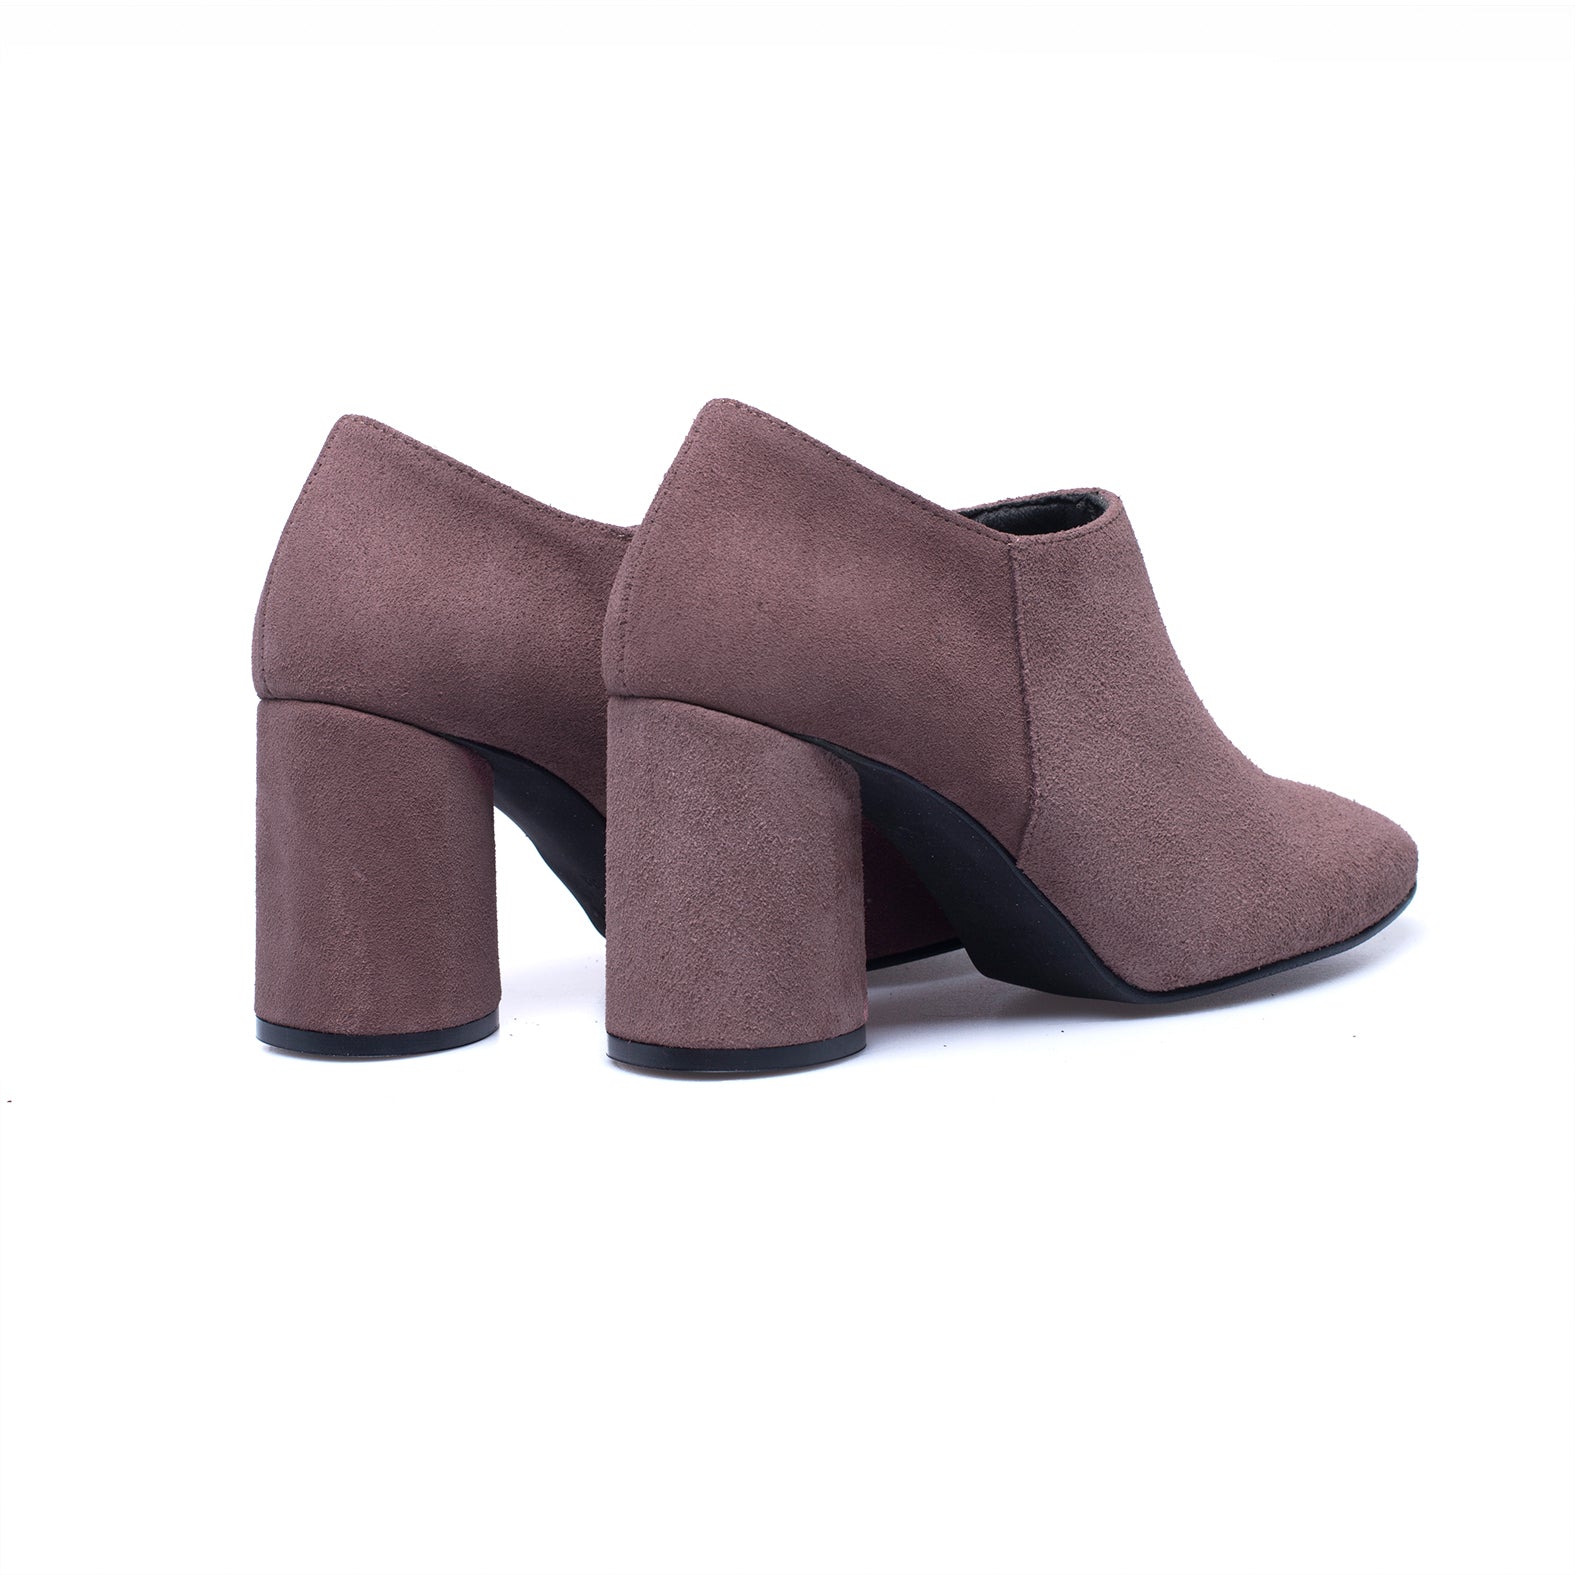 FASHION - LILAC block heel ankle boot